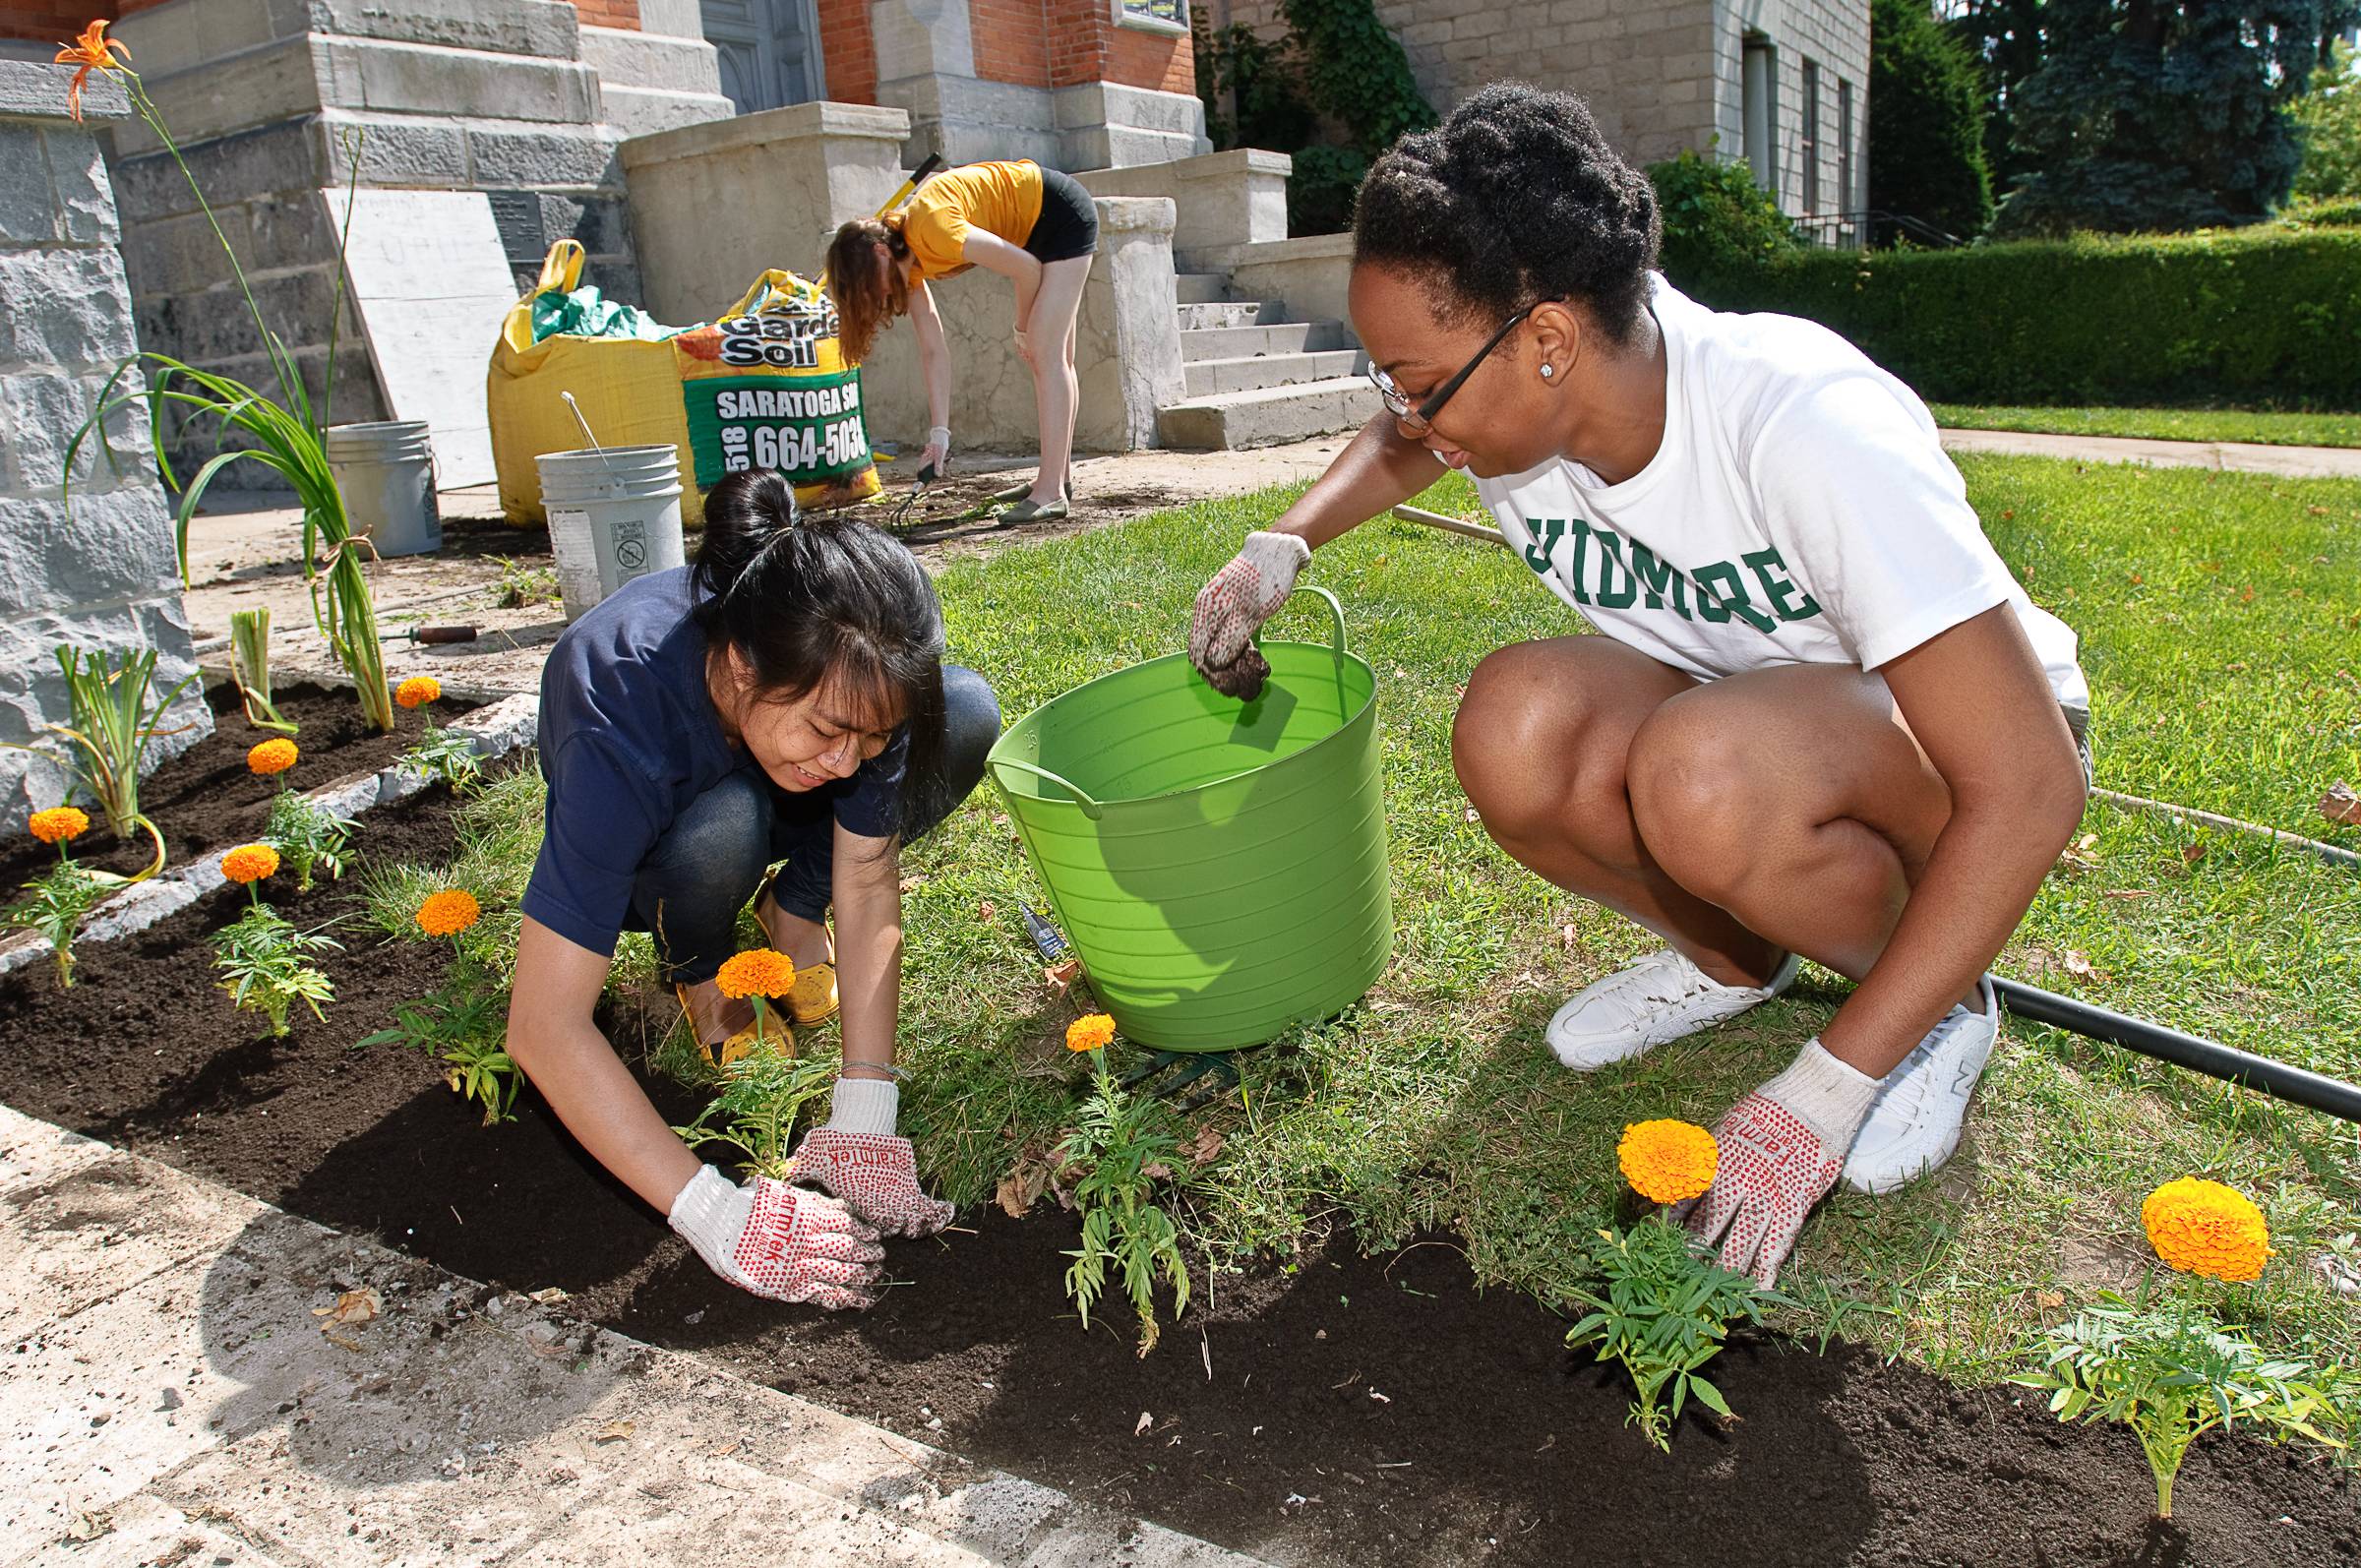 Two people work together to plant flowers as volunteers